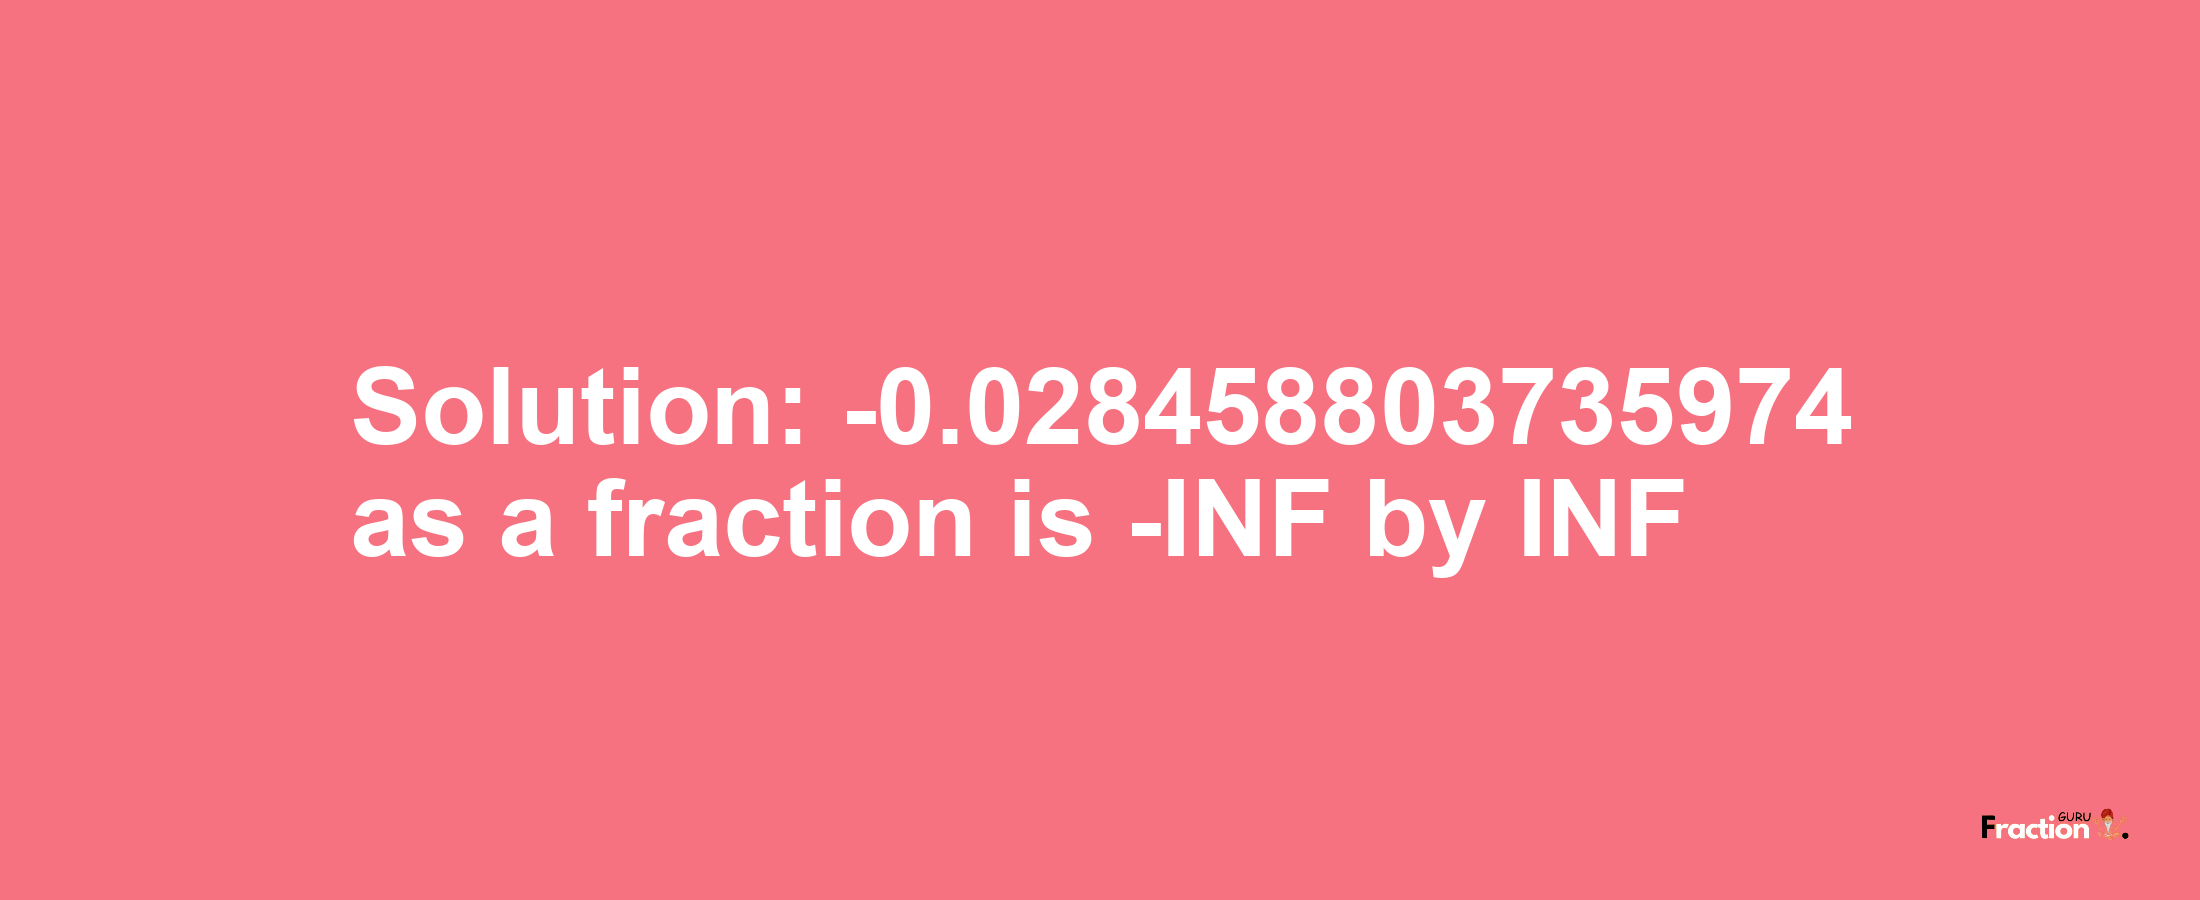 Solution:-0.028458803735974 as a fraction is -INF/INF